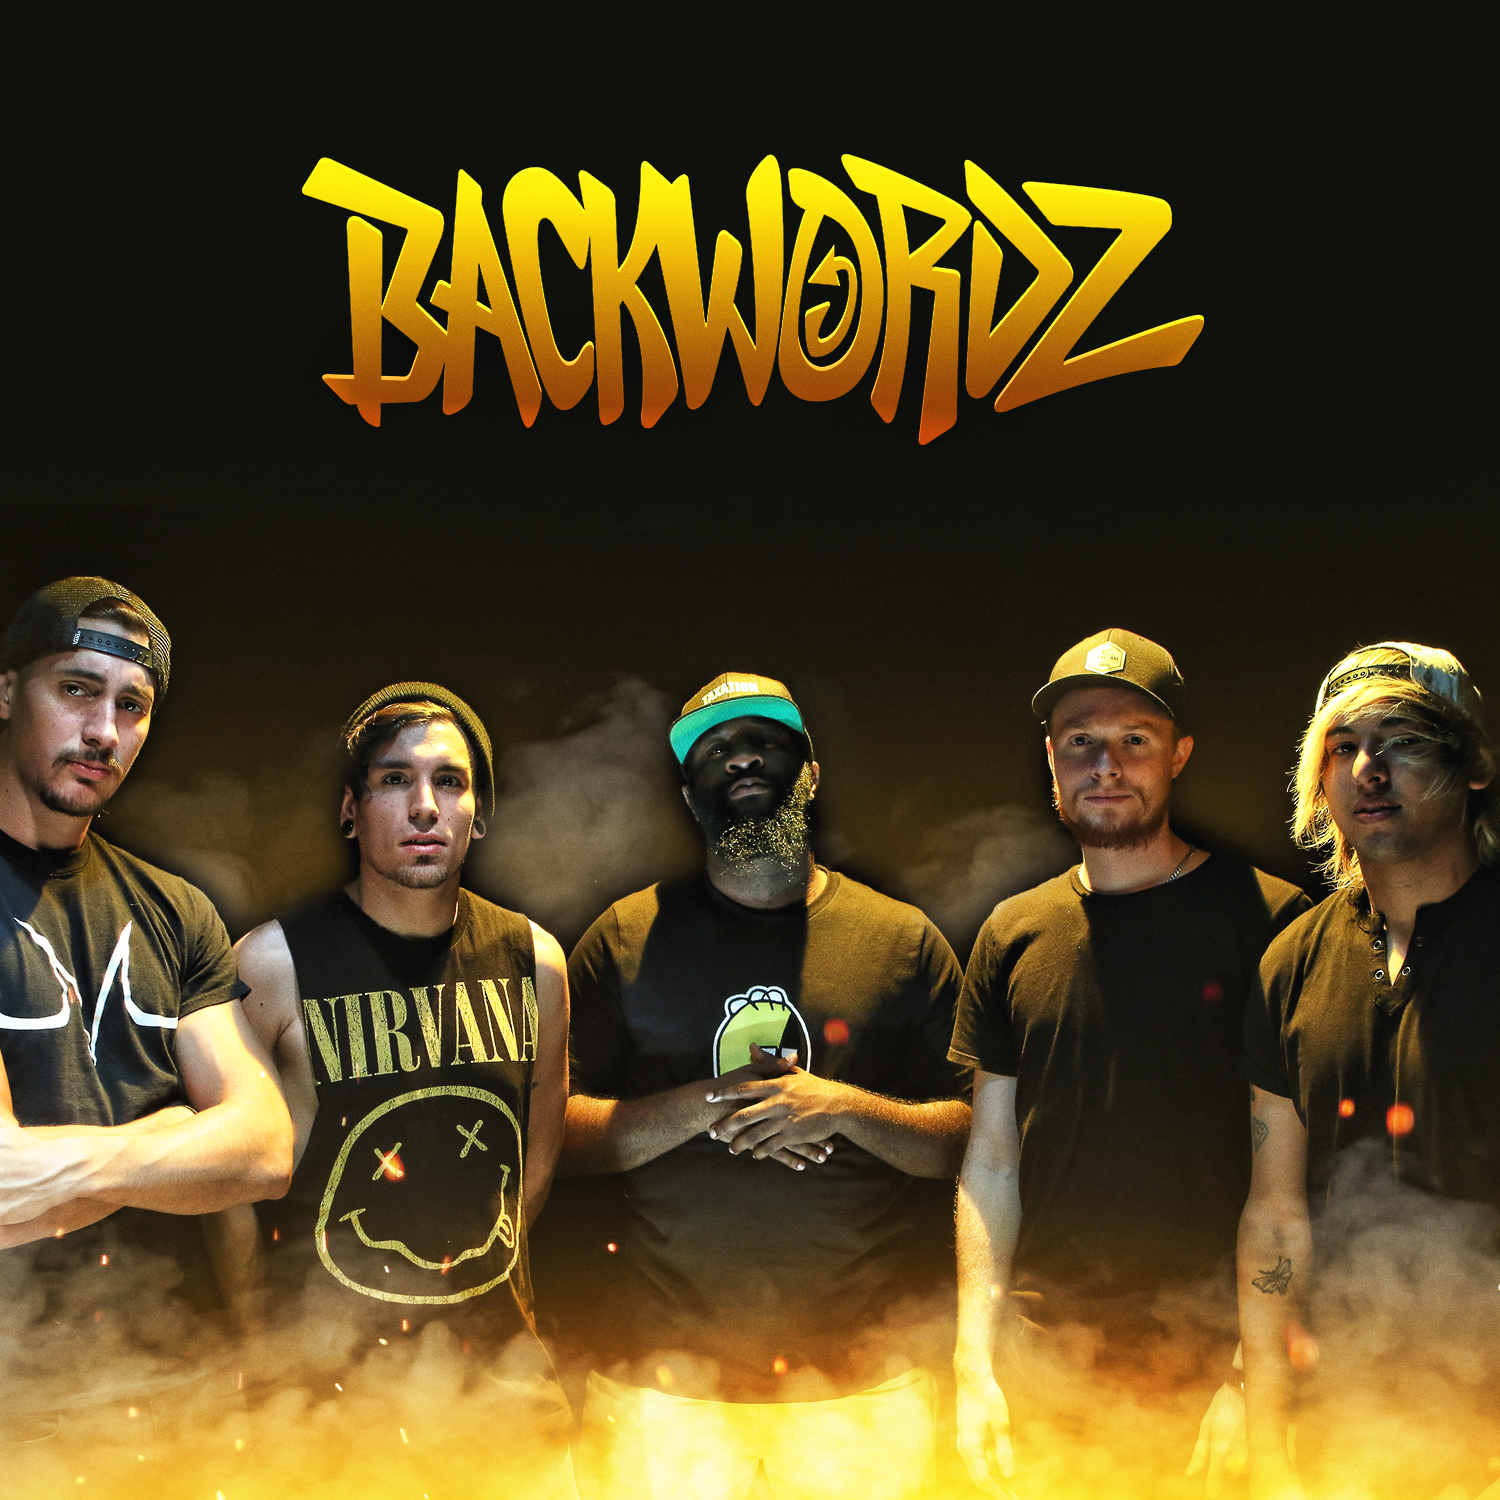 You are currently viewing BackWordz Be Great Post/Press Release